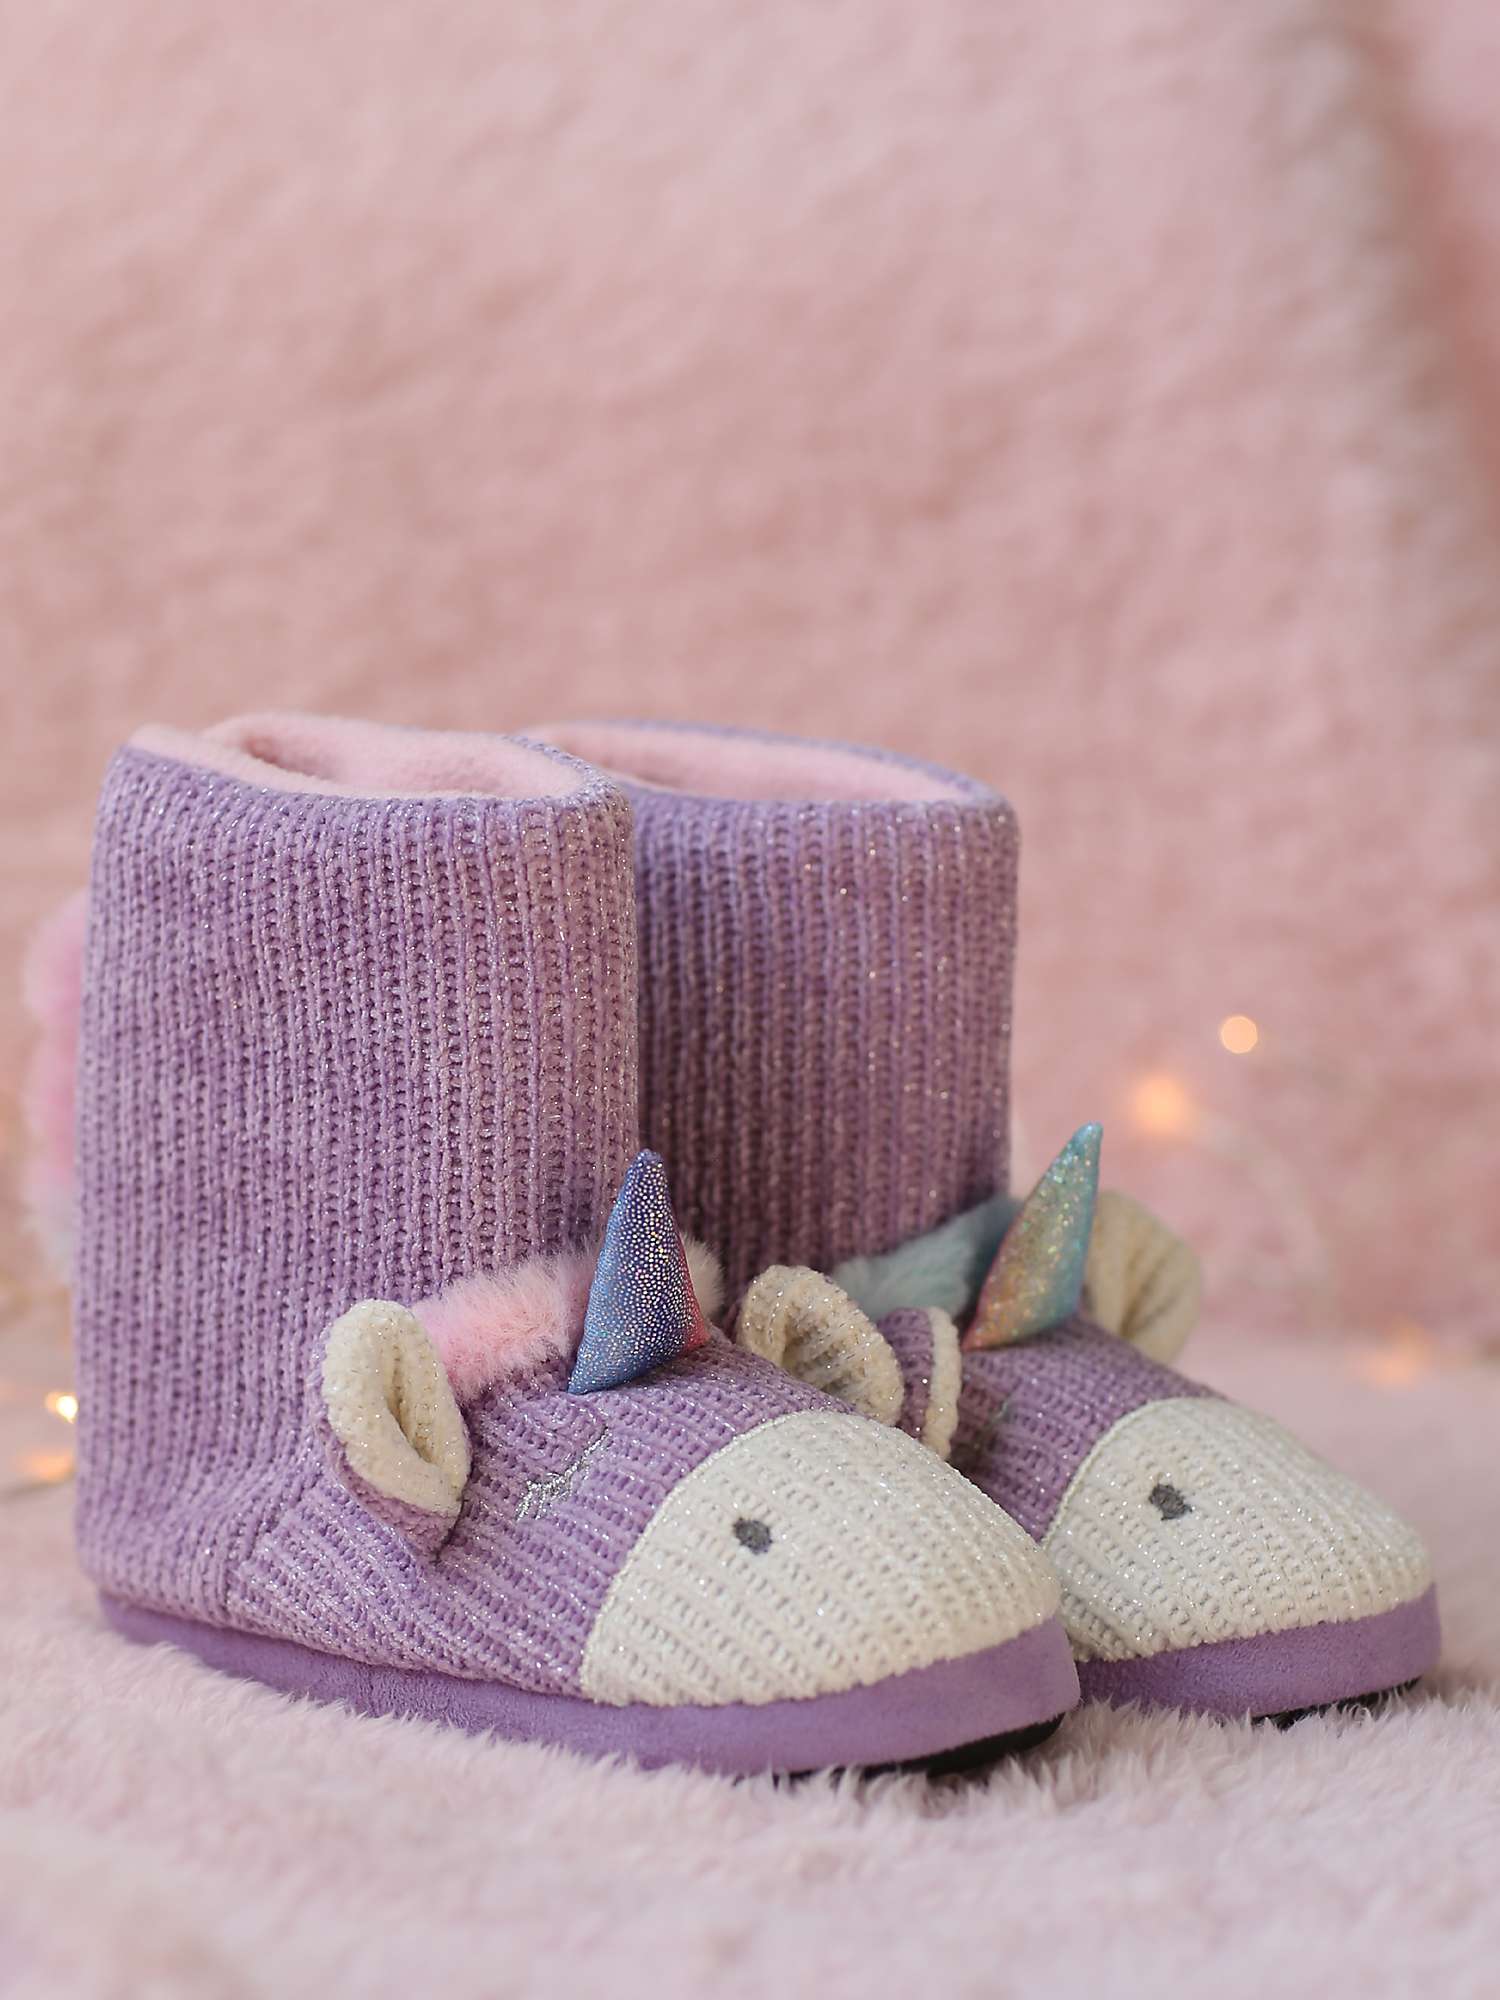 Buy totes Kids' Unicorn Boot Slippers Online at johnlewis.com